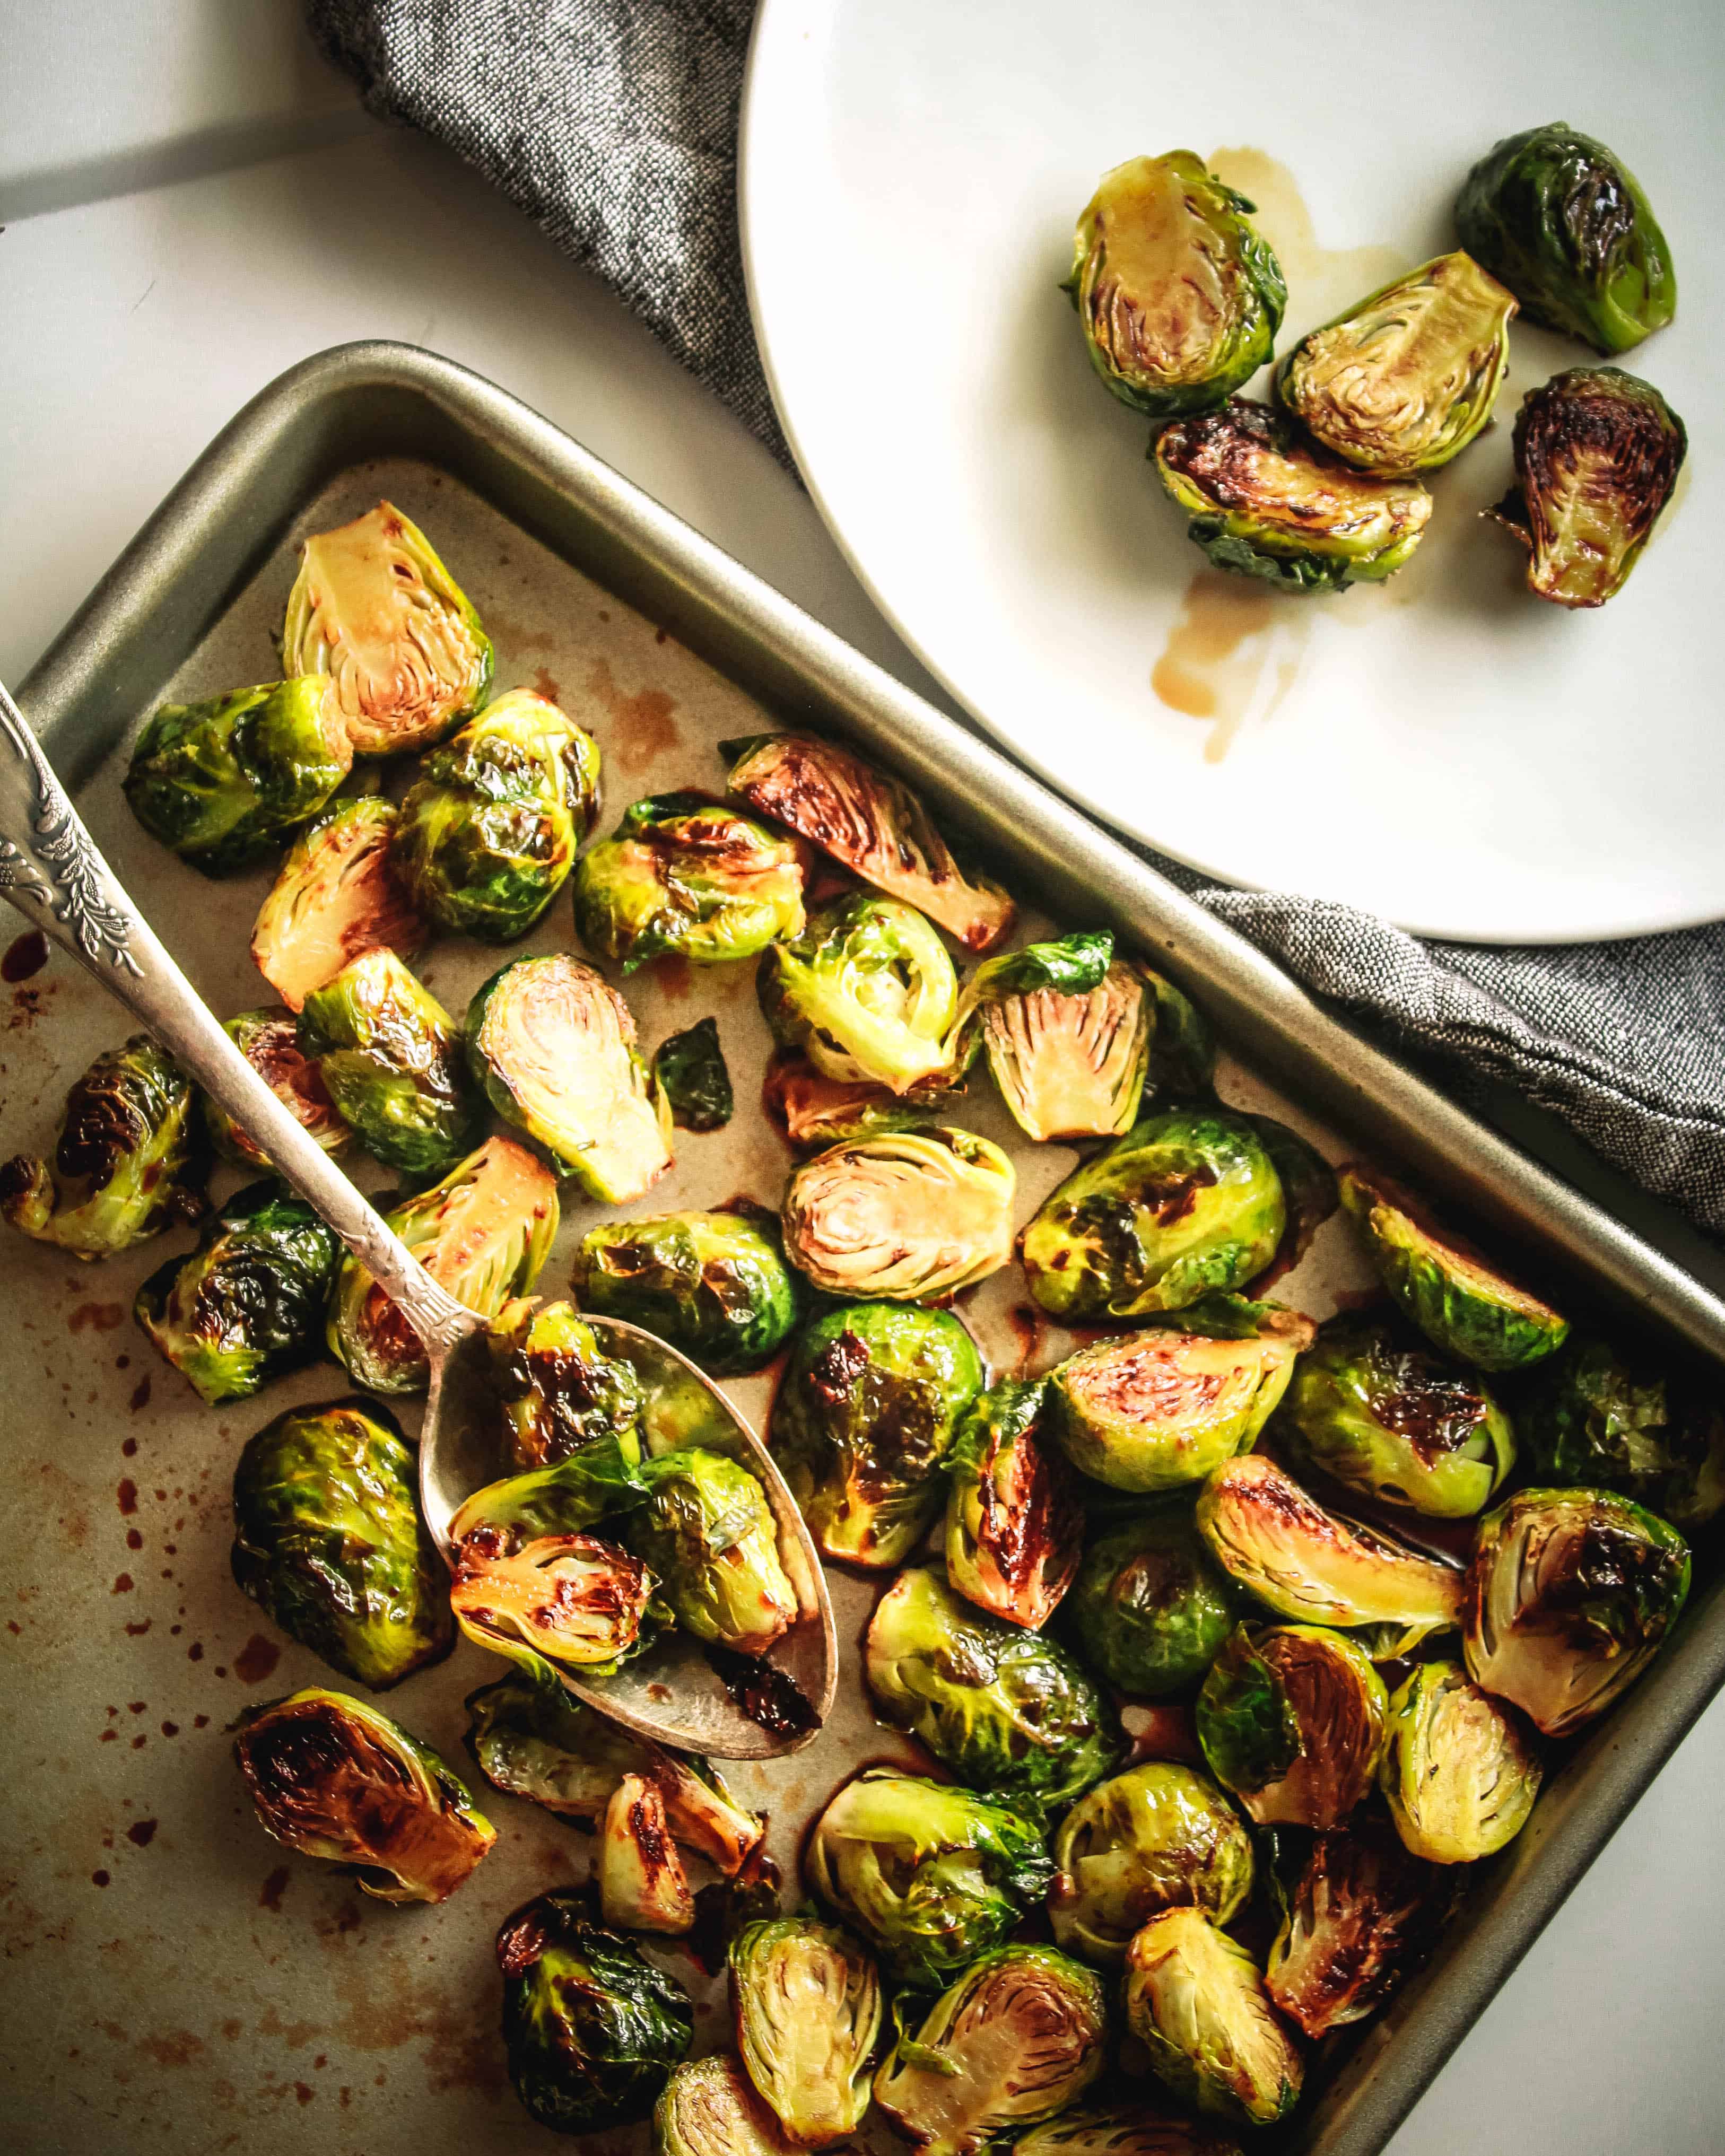 Balsamic Maple Roasted Brussel Sprouts